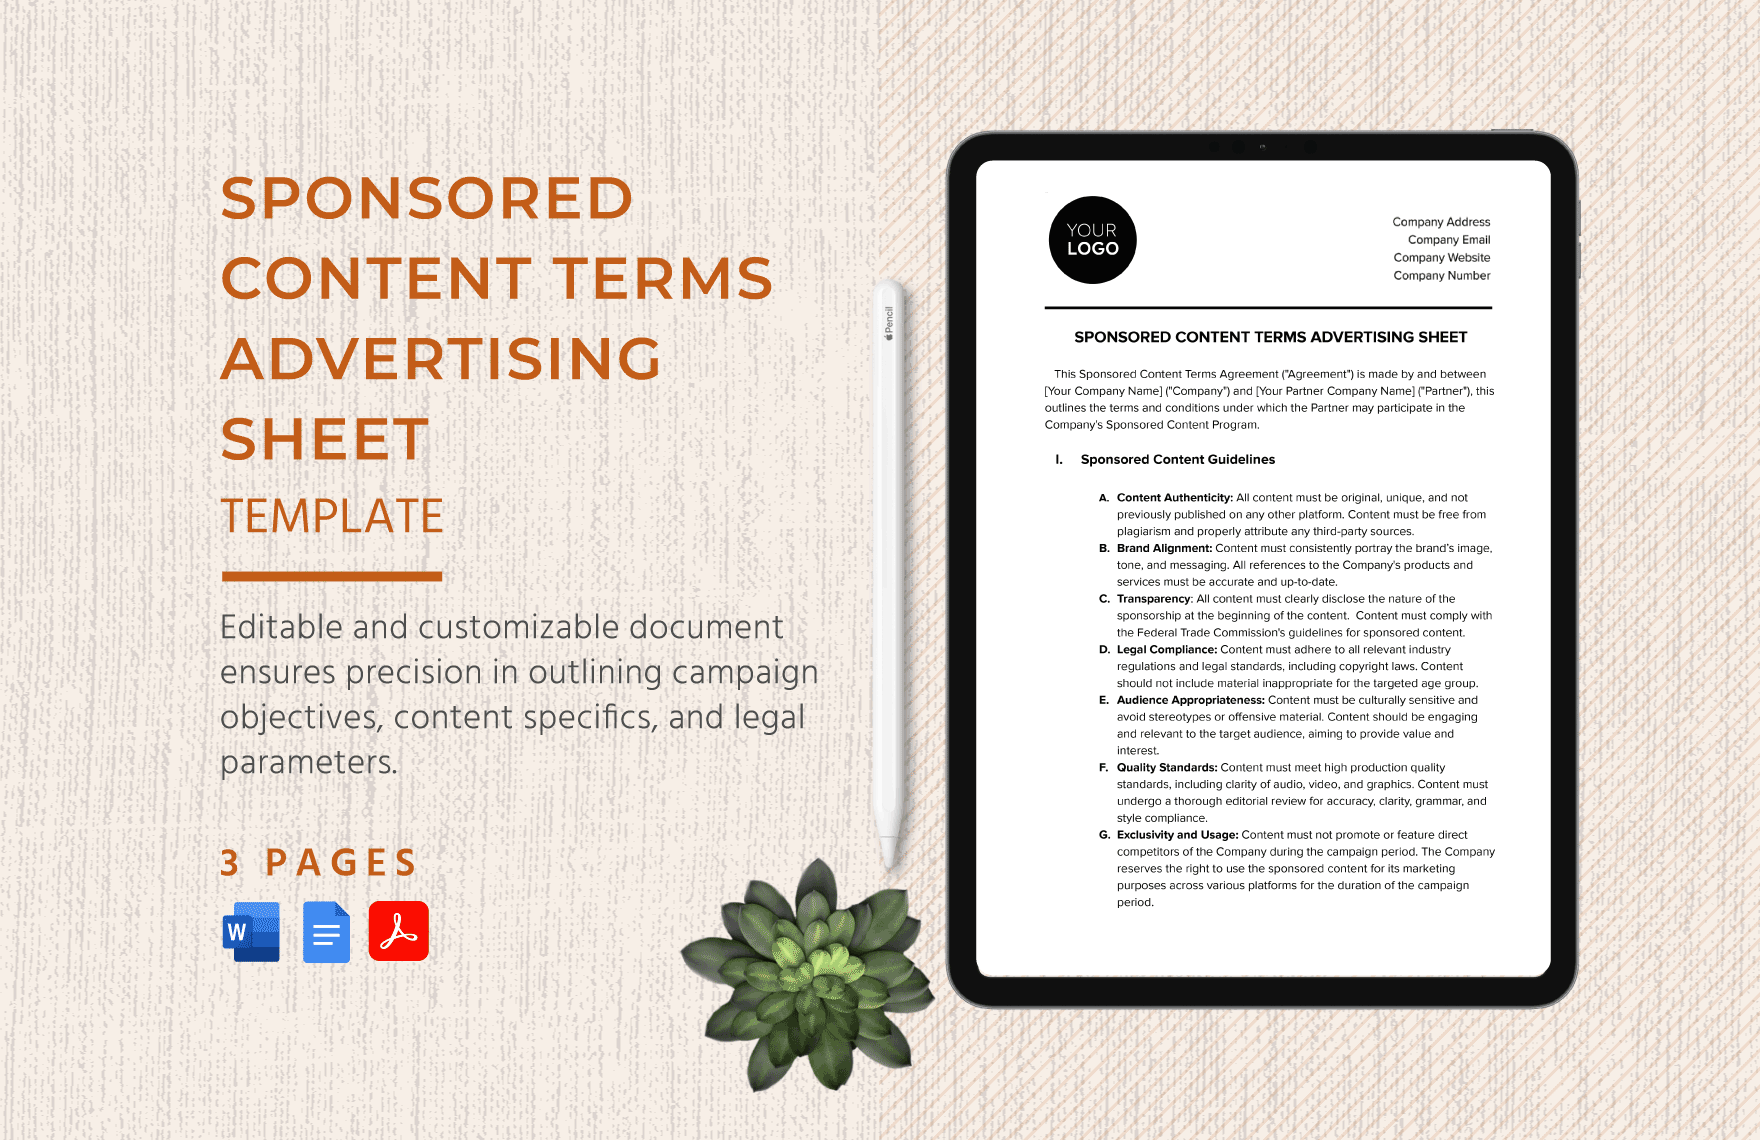 Sponsored Content Terms Advertising Sheet Template